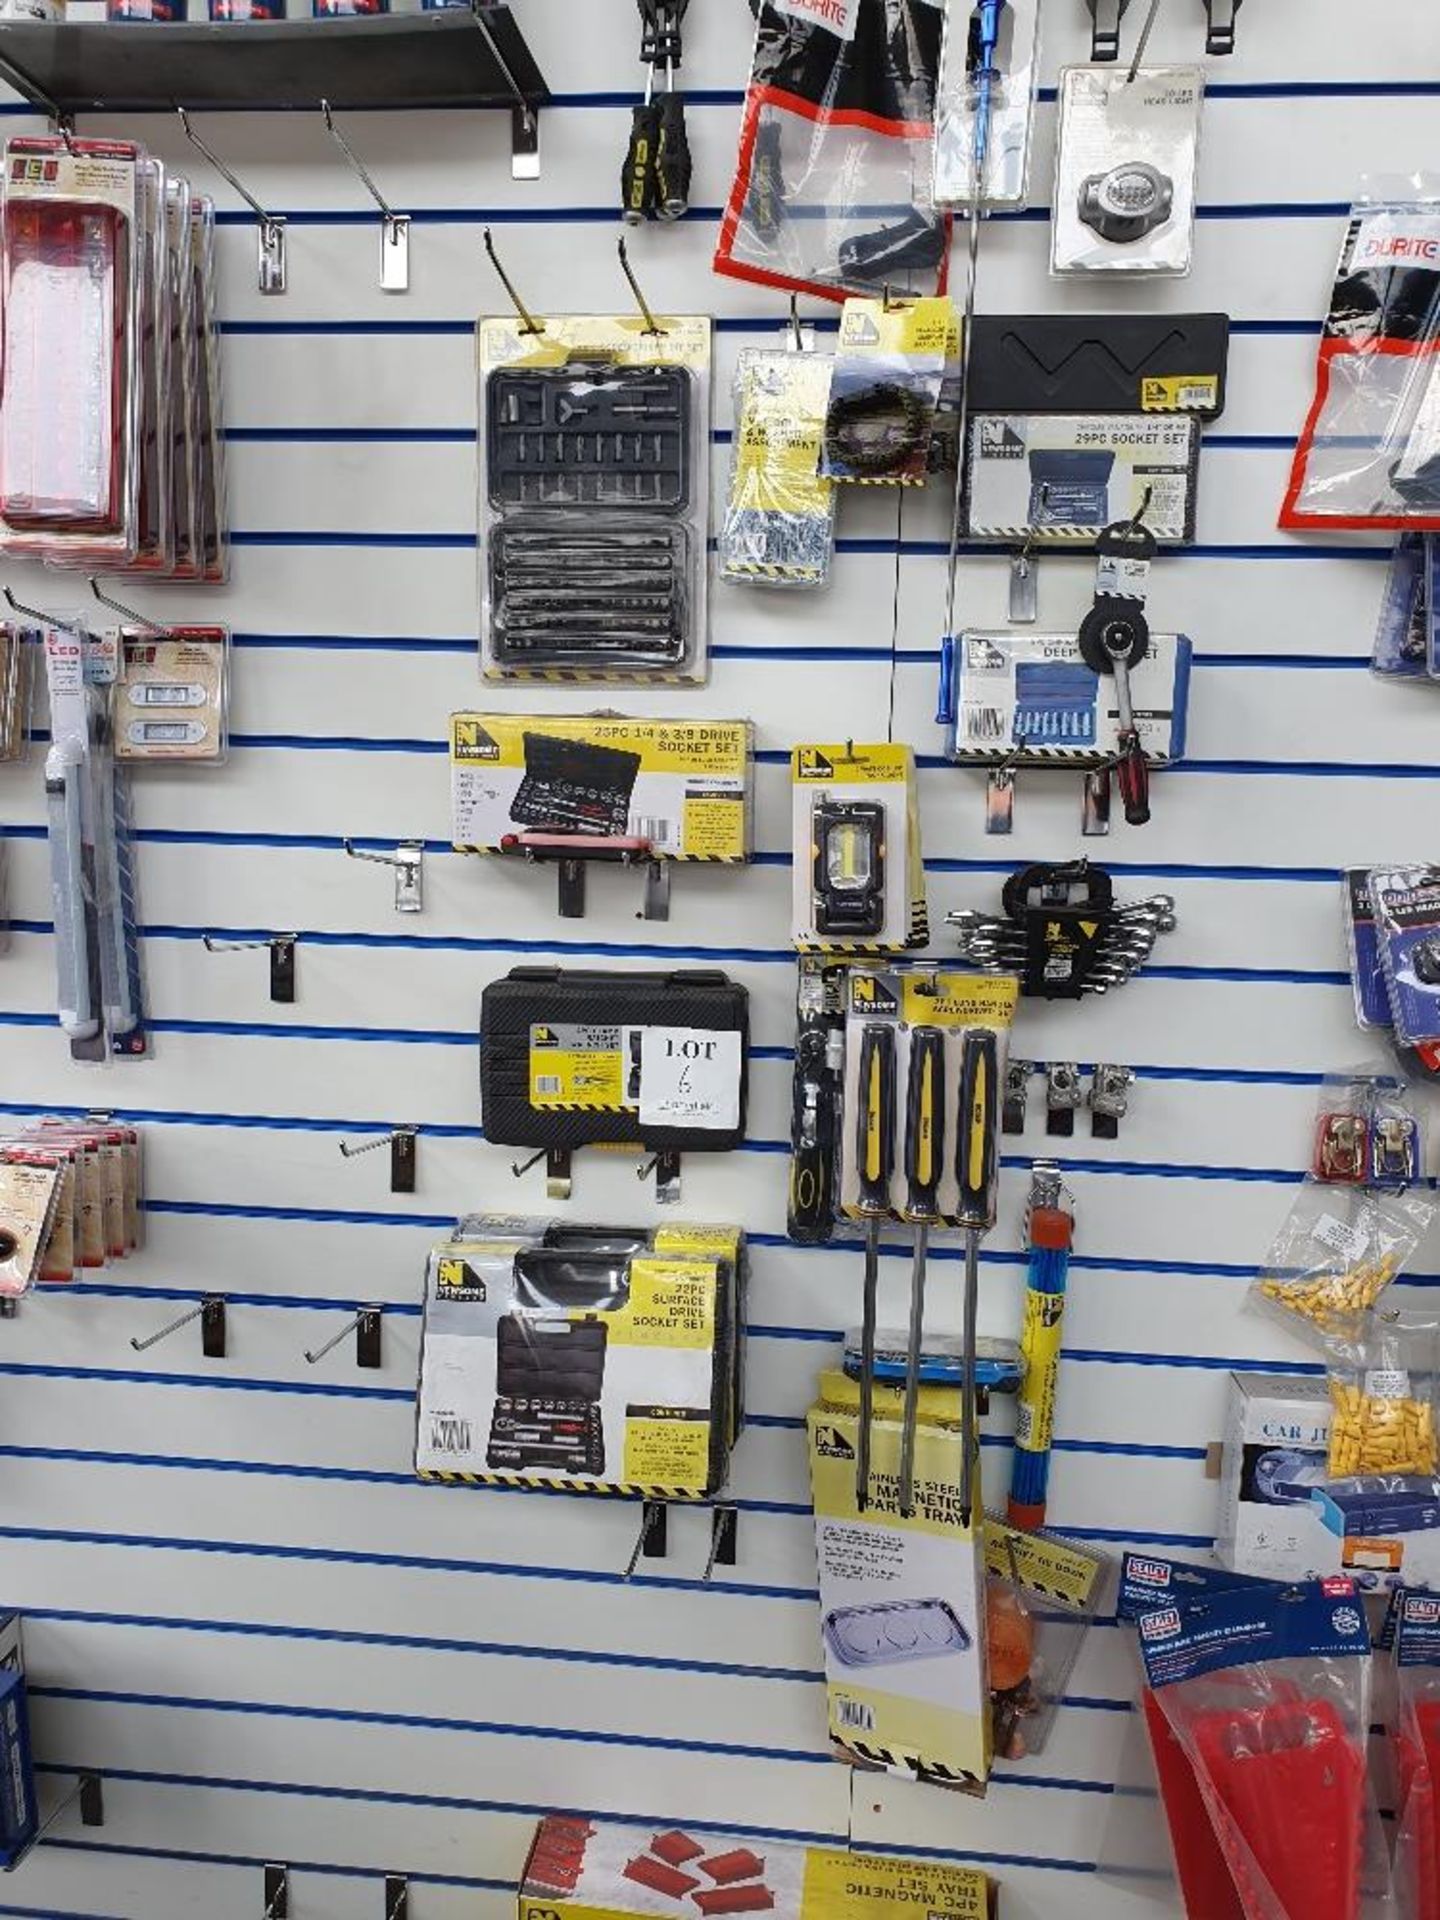 Rack of assorted socket sets, wrenches and screwdrivers